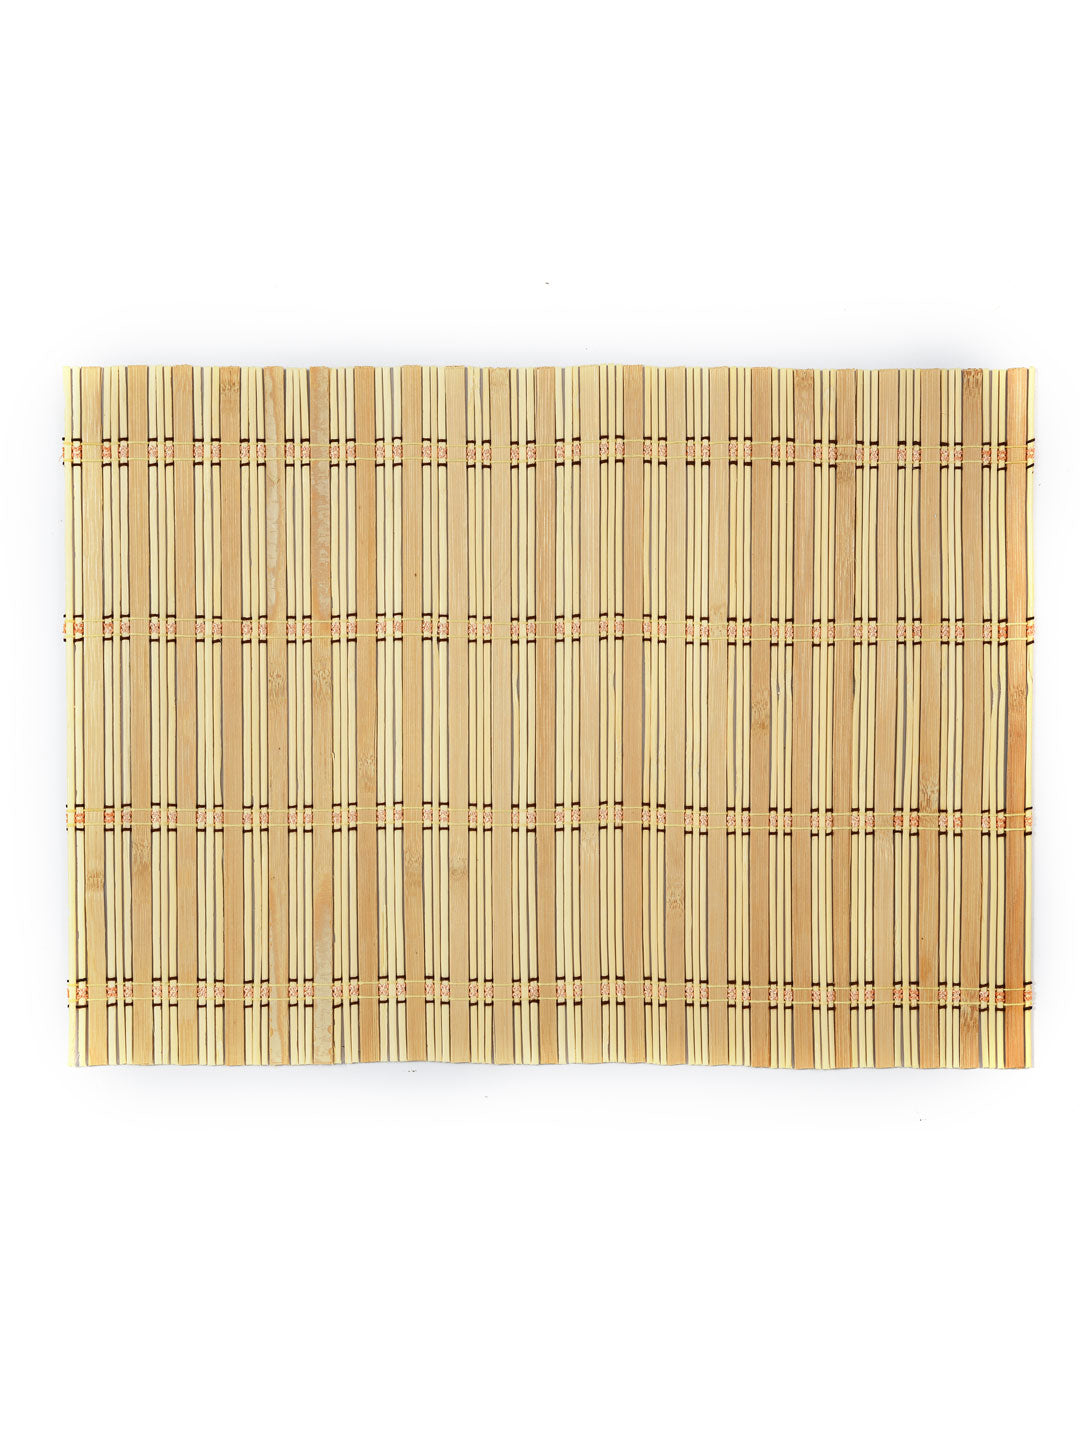 Bamboo Placemat 45 x 30 cm Set of 6 (Brown)